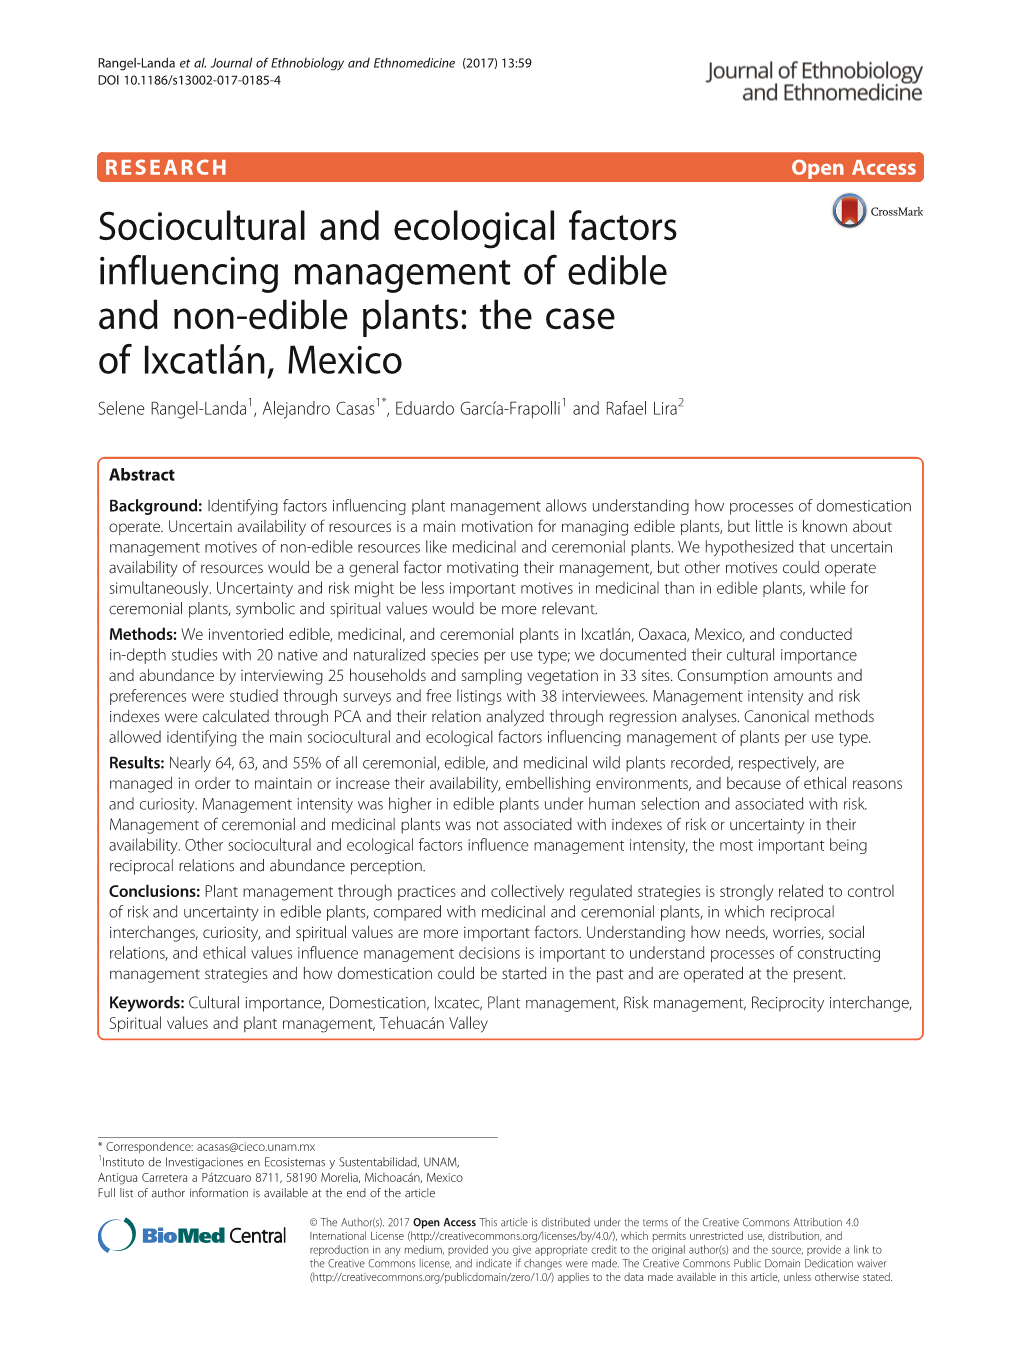 Sociocultural and Ecological Factors Influencing Management of Edible